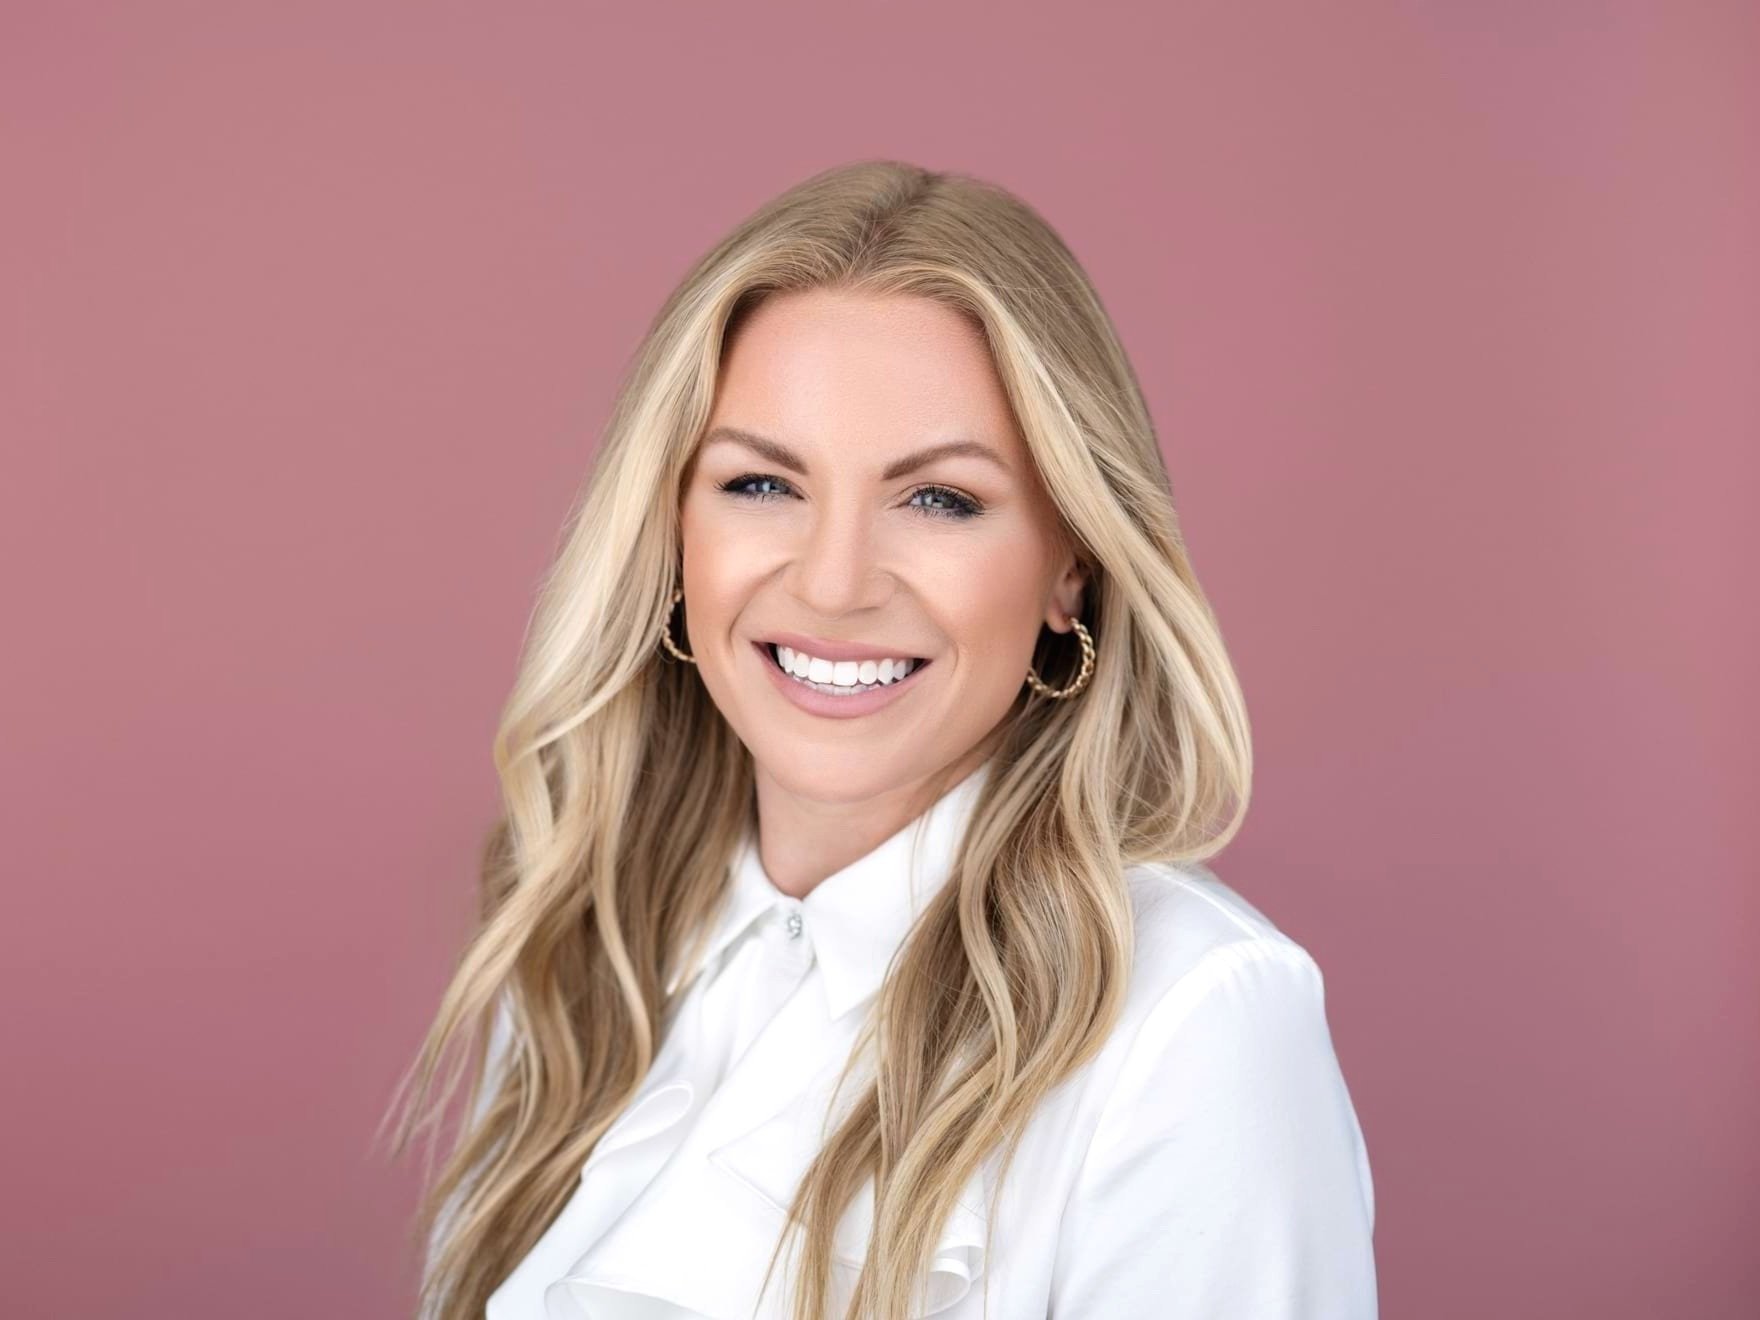 Headshot of Blonde Woman on Pink Background in a Photography Studio by Miranda Kelton Photography